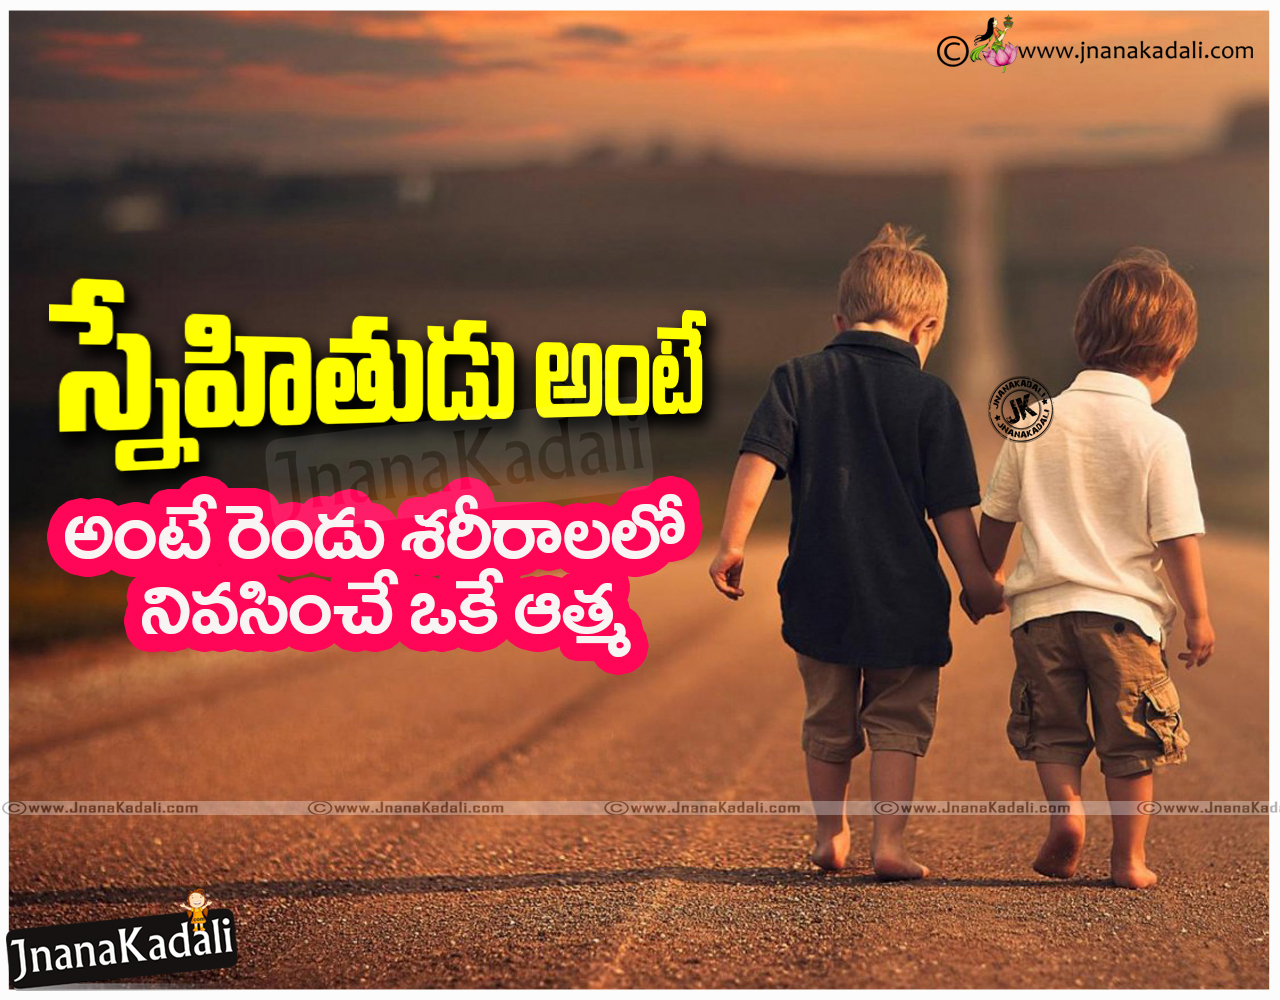 Heart Touching Friendship Messages and Quotes in Telugu | JNANA KADALI